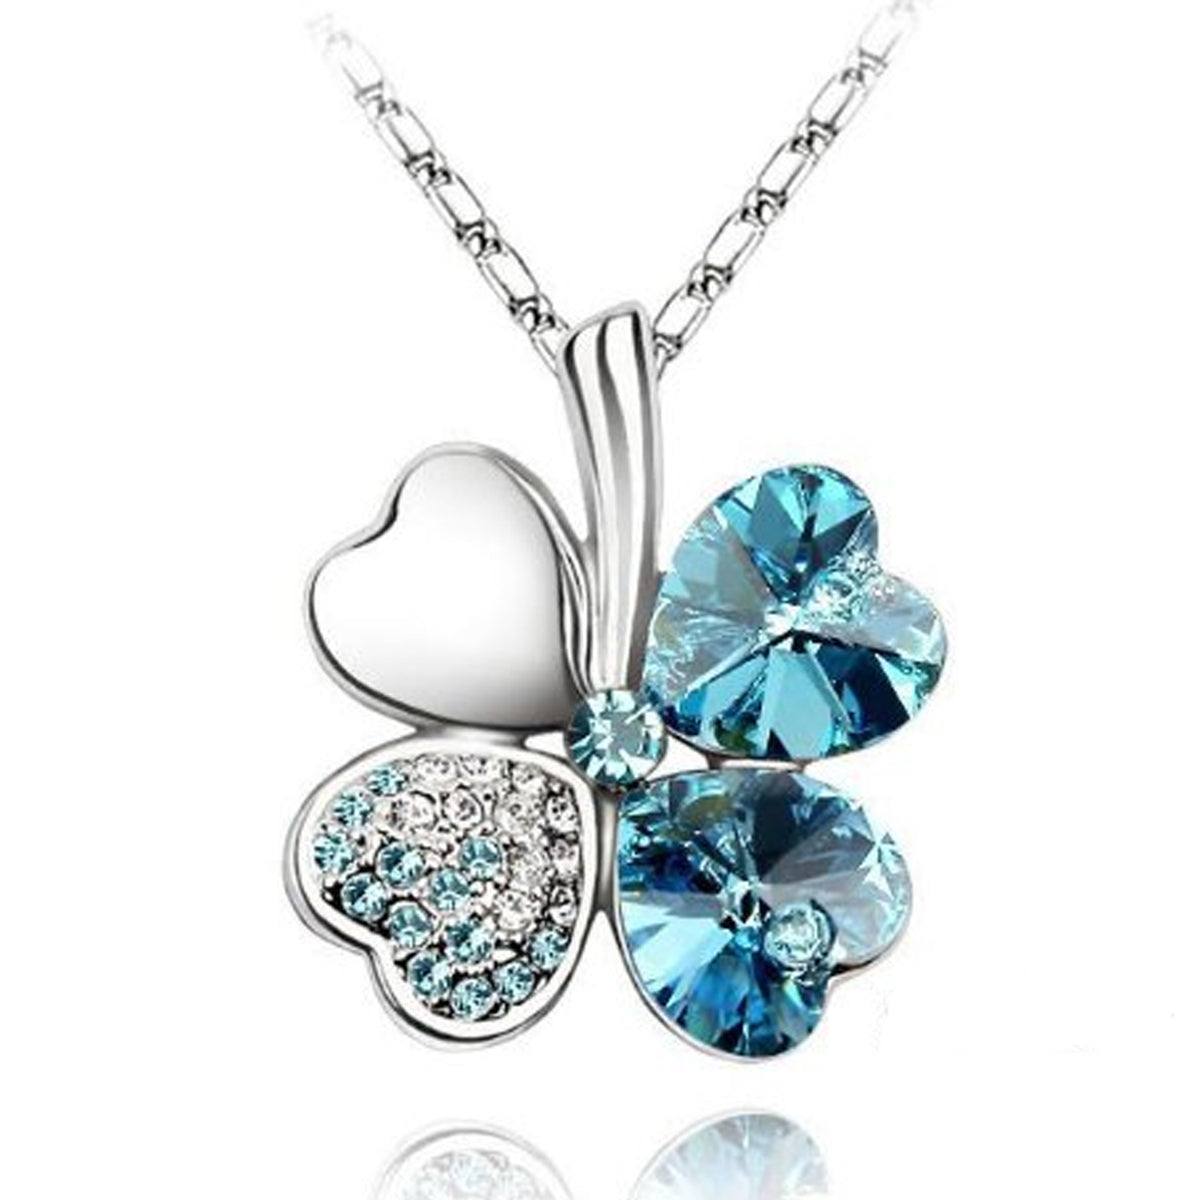 Gold Plated Crystal Heart Shaped Four Leaf Clover Pendant Necklace and Stud Earrings Jewelry Set (Sea Blue)